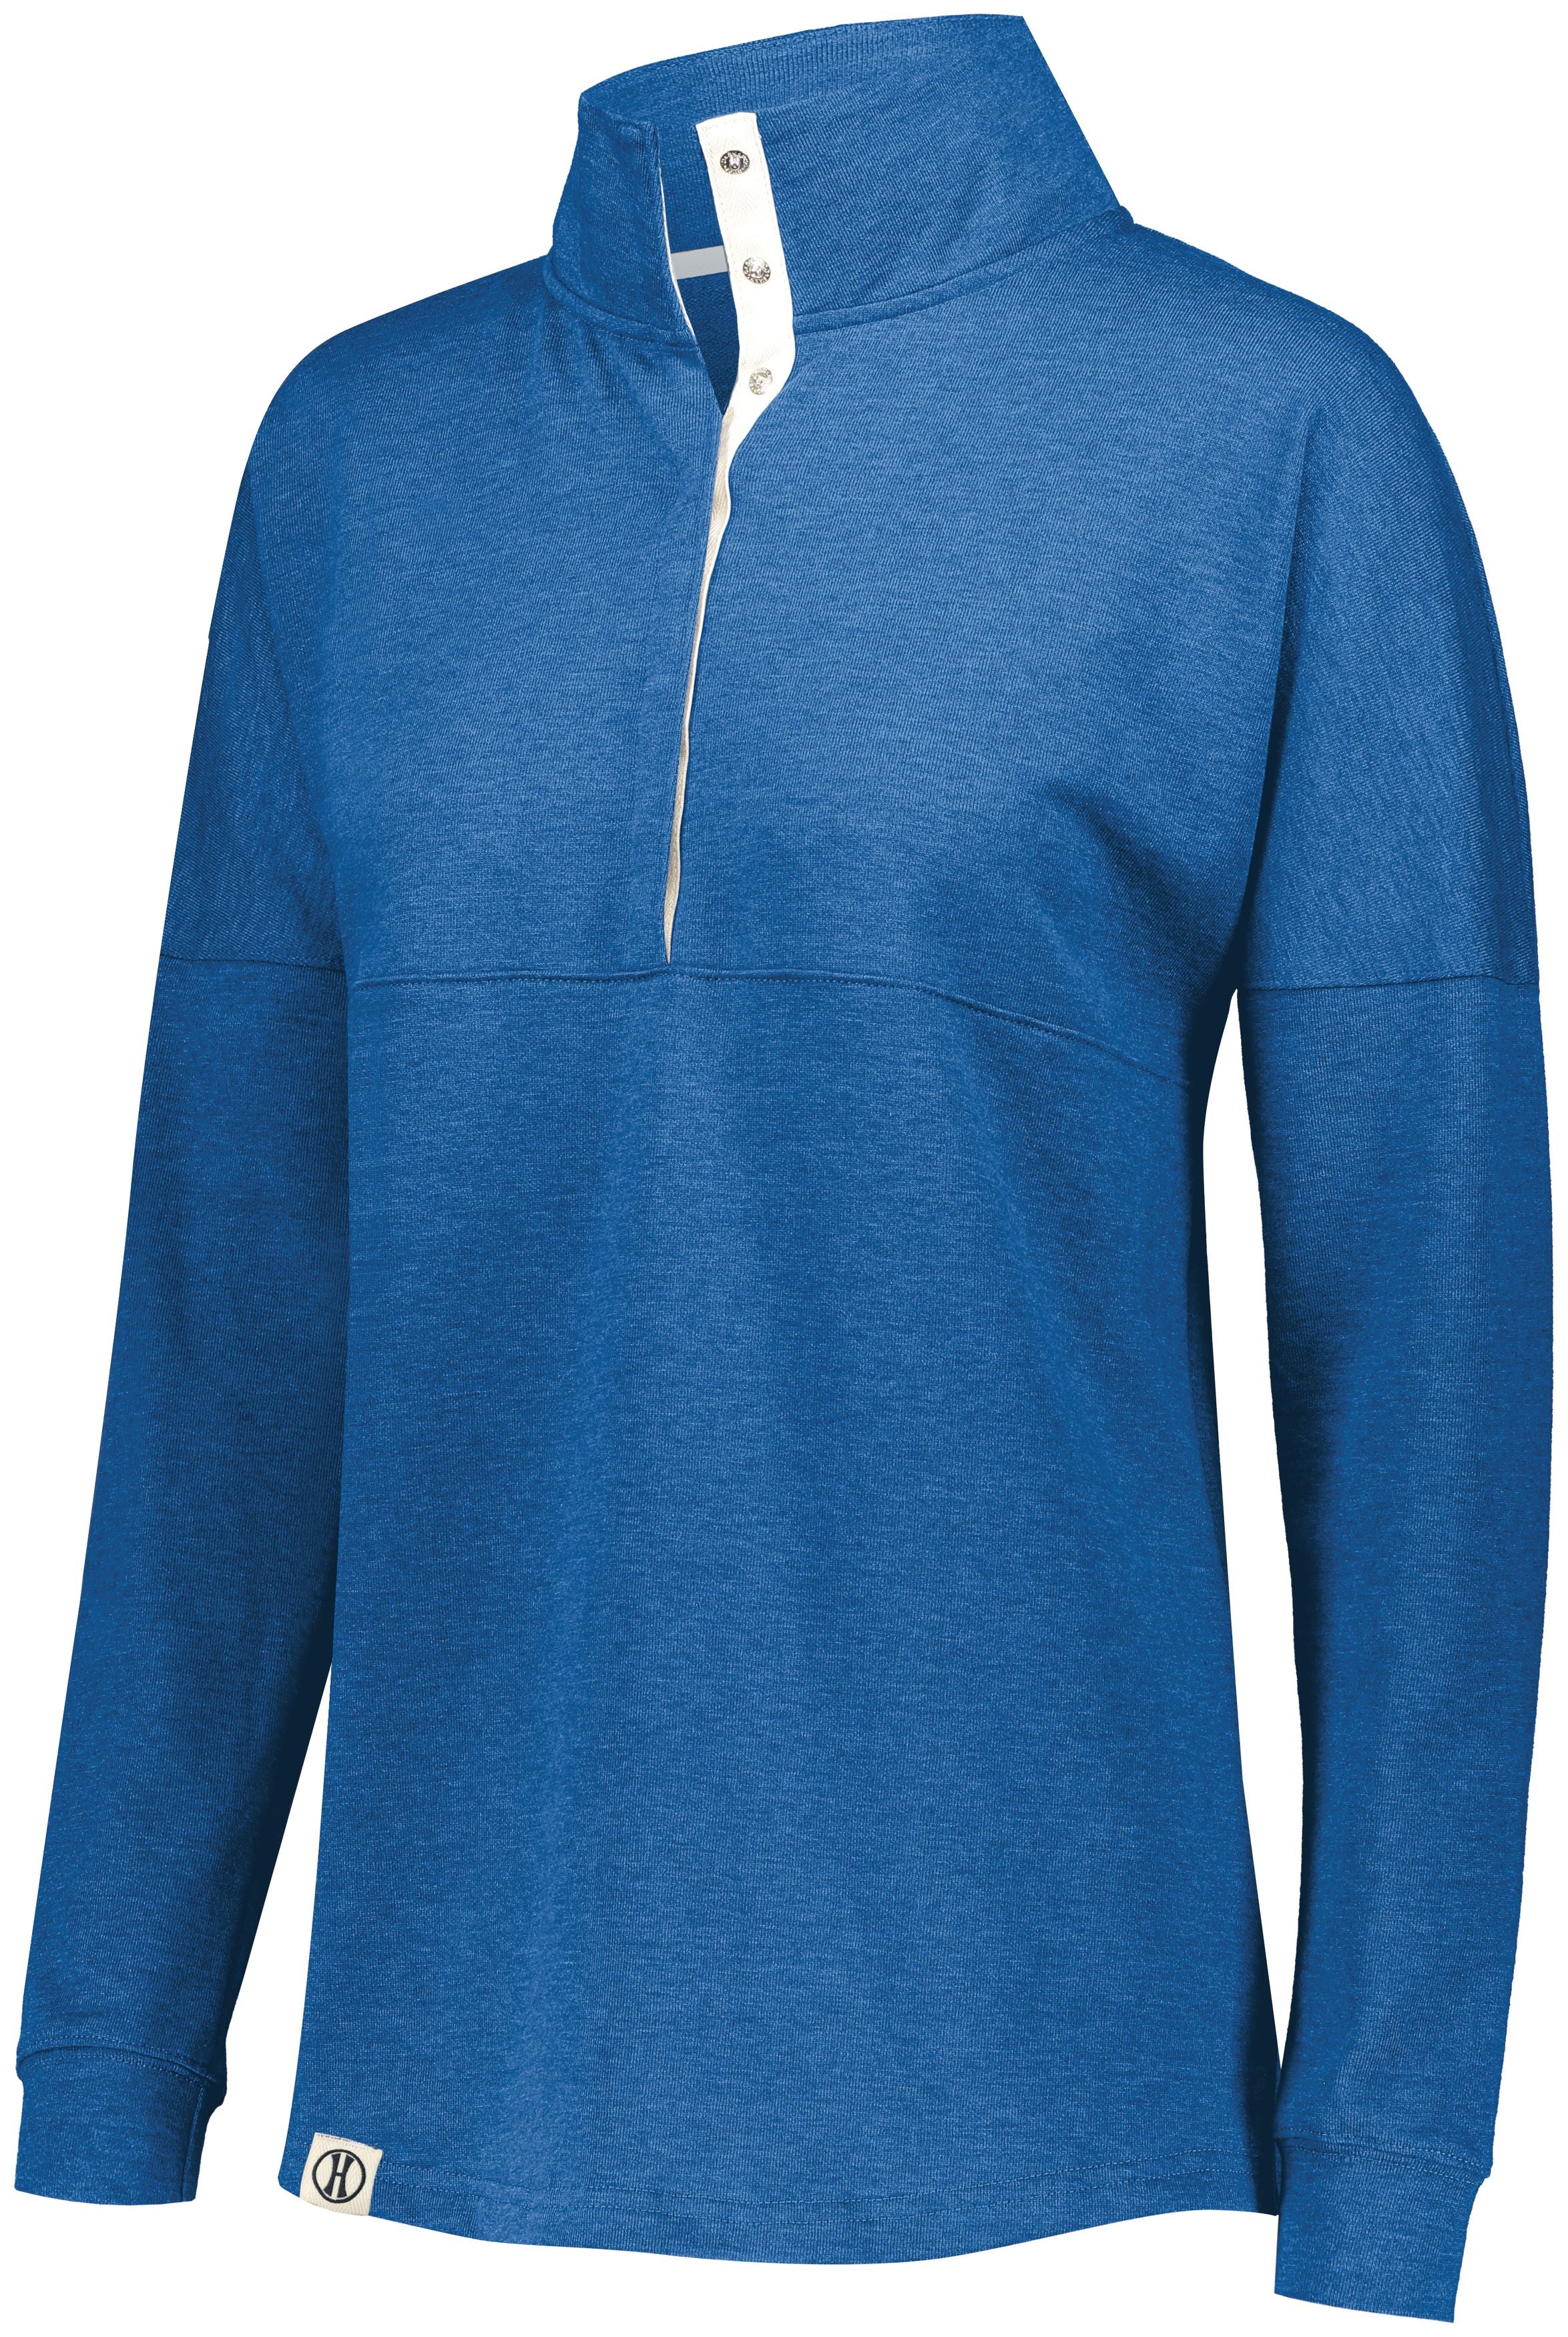 Holloway Ladies Sophomore Pullover in Royal Heather  -Part of the Ladies, Holloway, Shirts product lines at KanaleyCreations.com